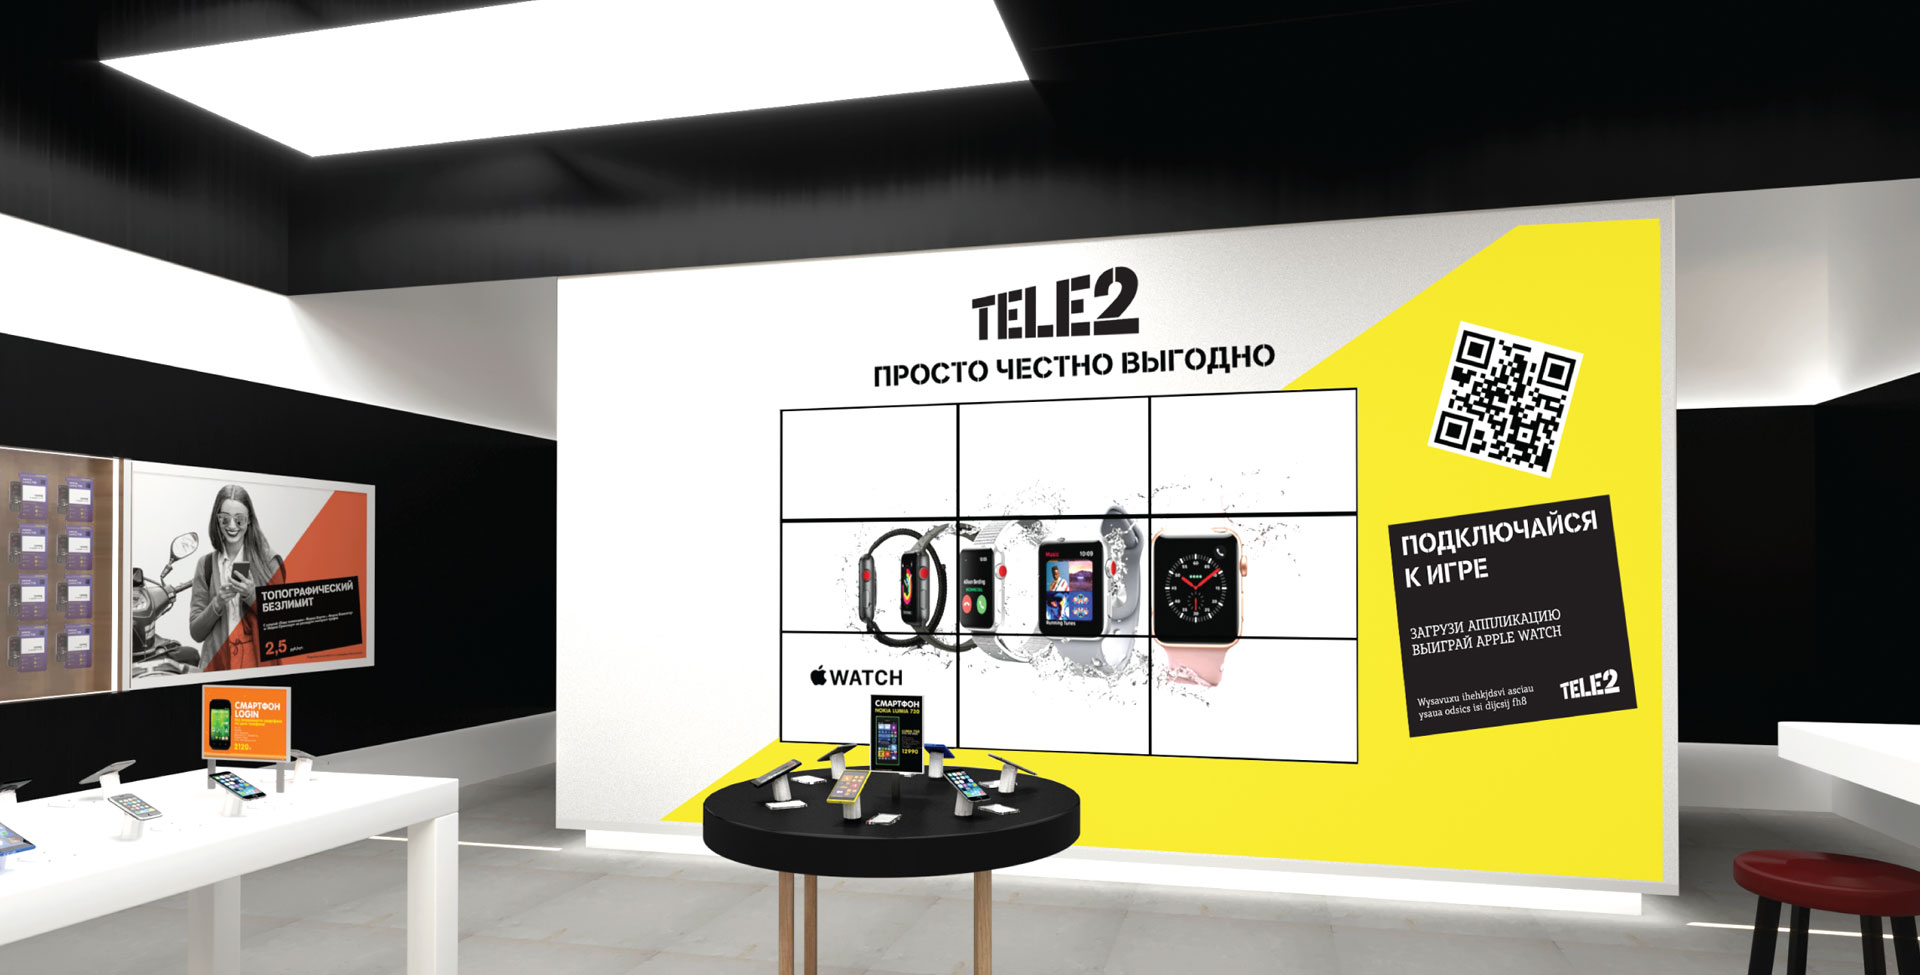 Tele2 telecoms and technology new store design smart phone branding and merchandising Russia